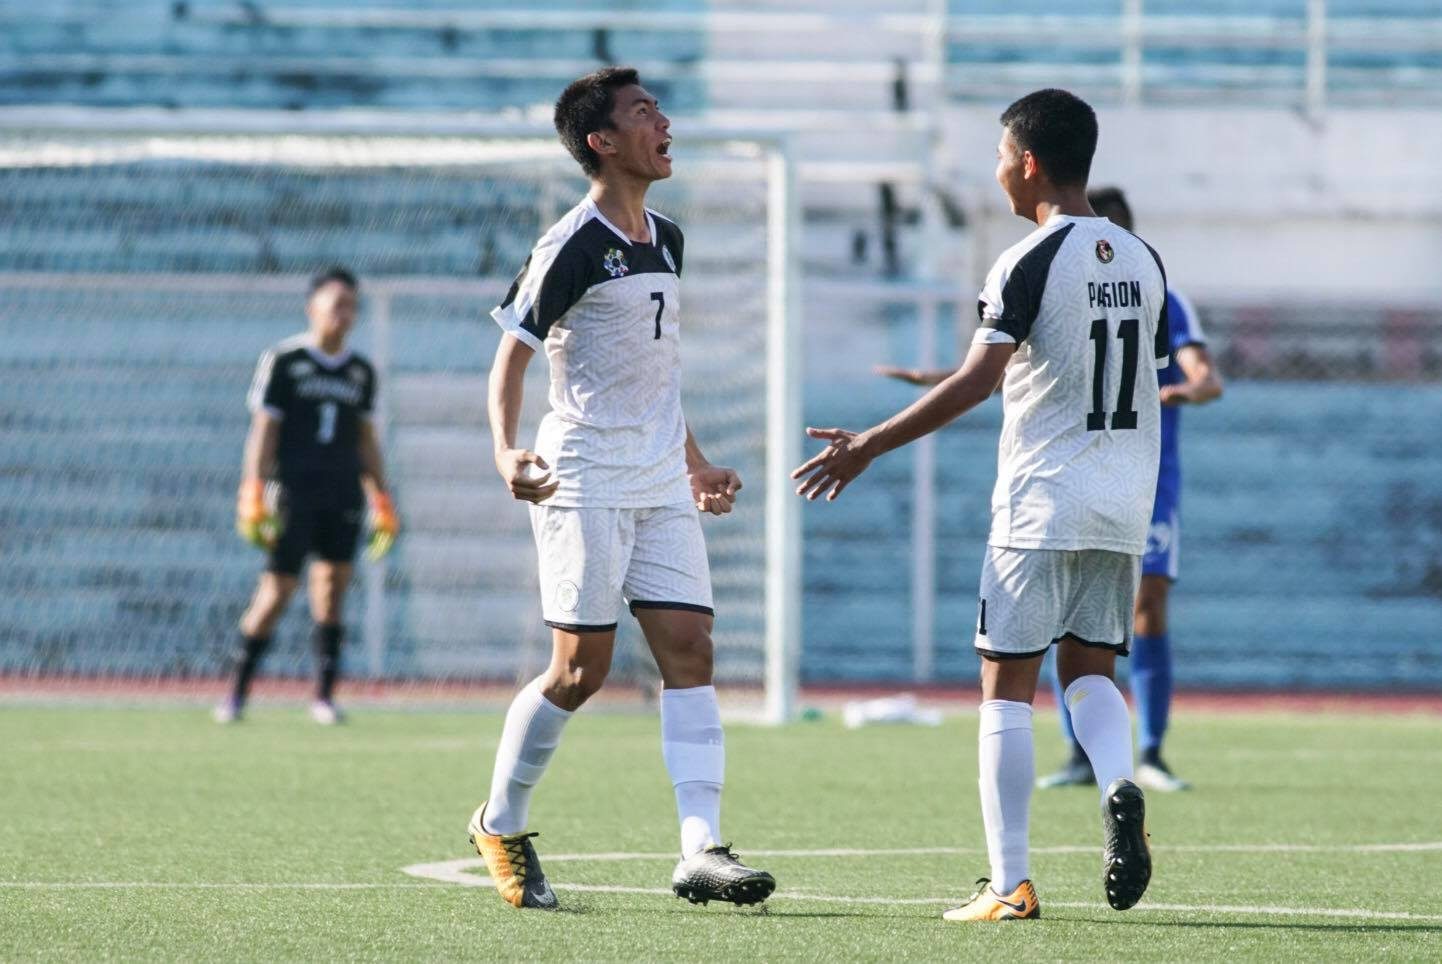 Dimacali’s lone goal sends UST to the finals over defending champ Ateneo